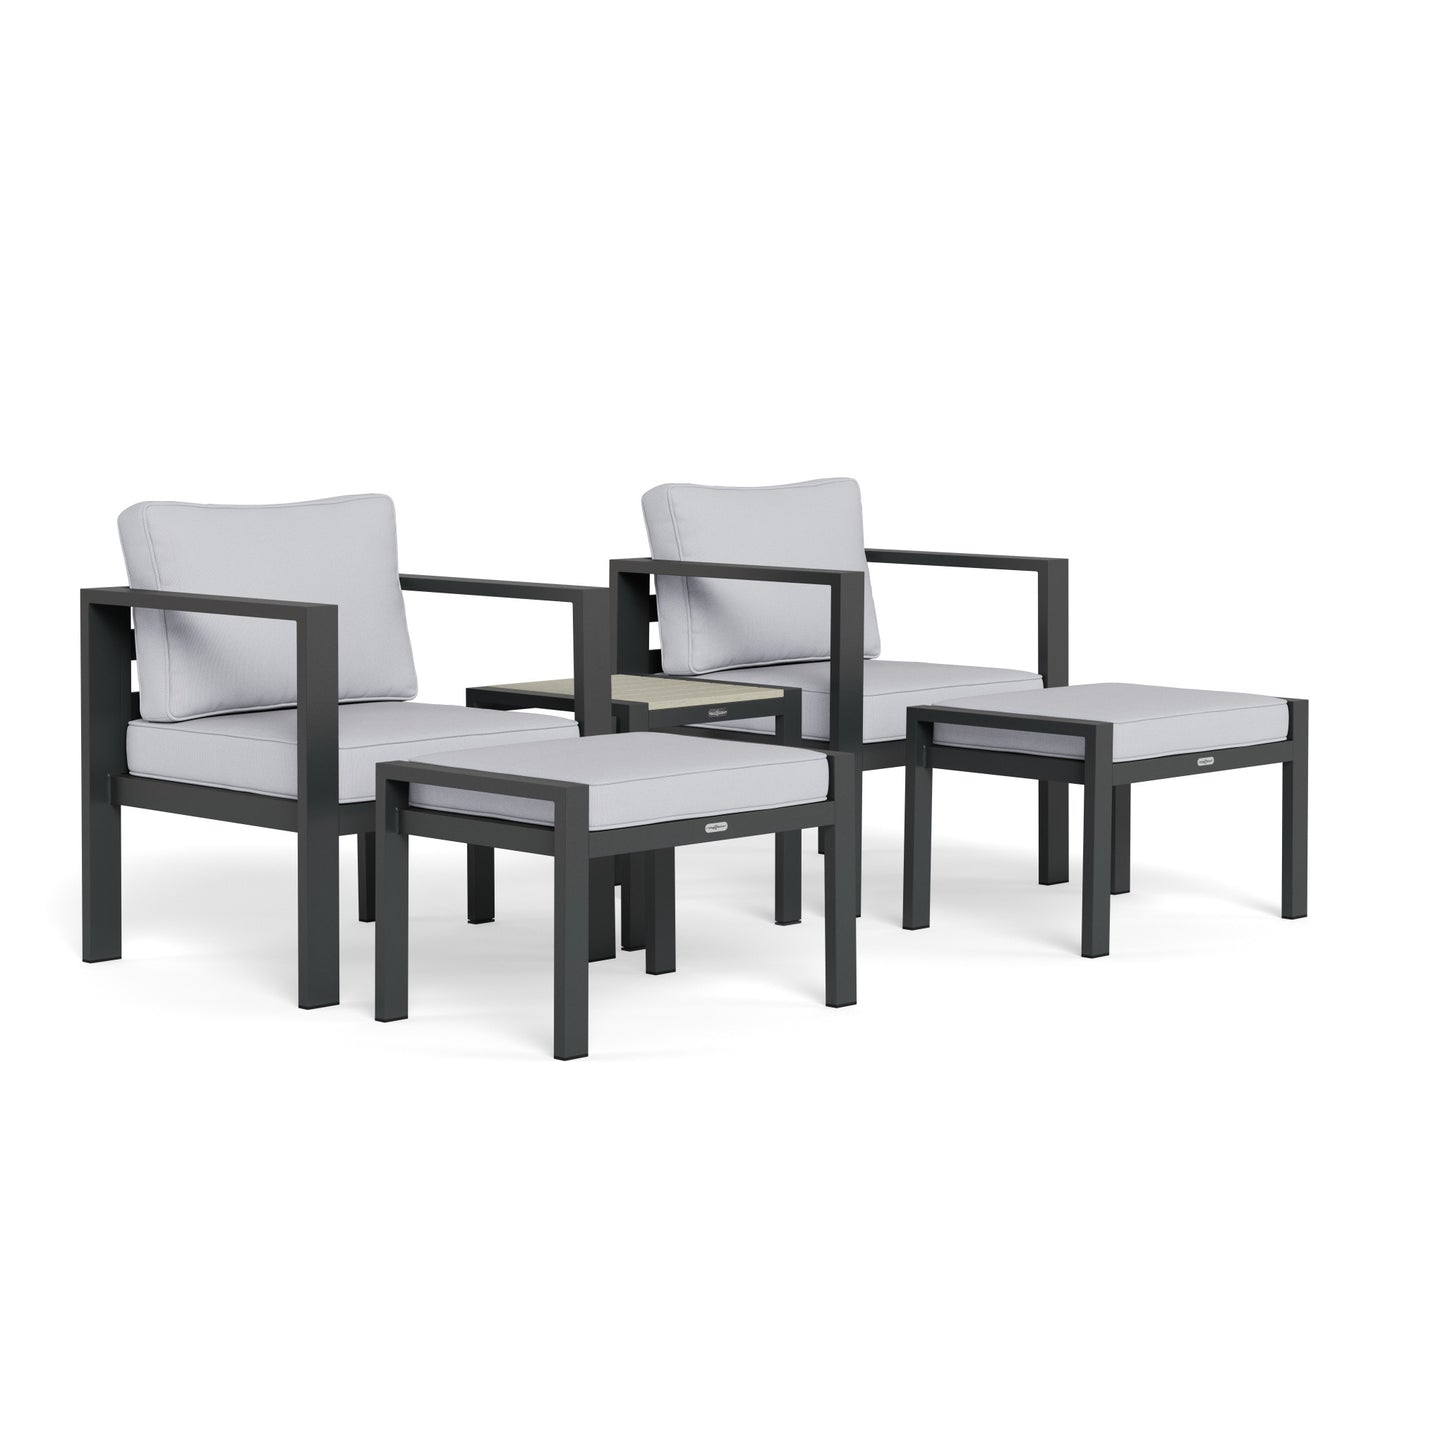 Lakeview 5-Piece Bistro Set (2 Chairs, 2 Ottoman, 1 Side Table) - Gray